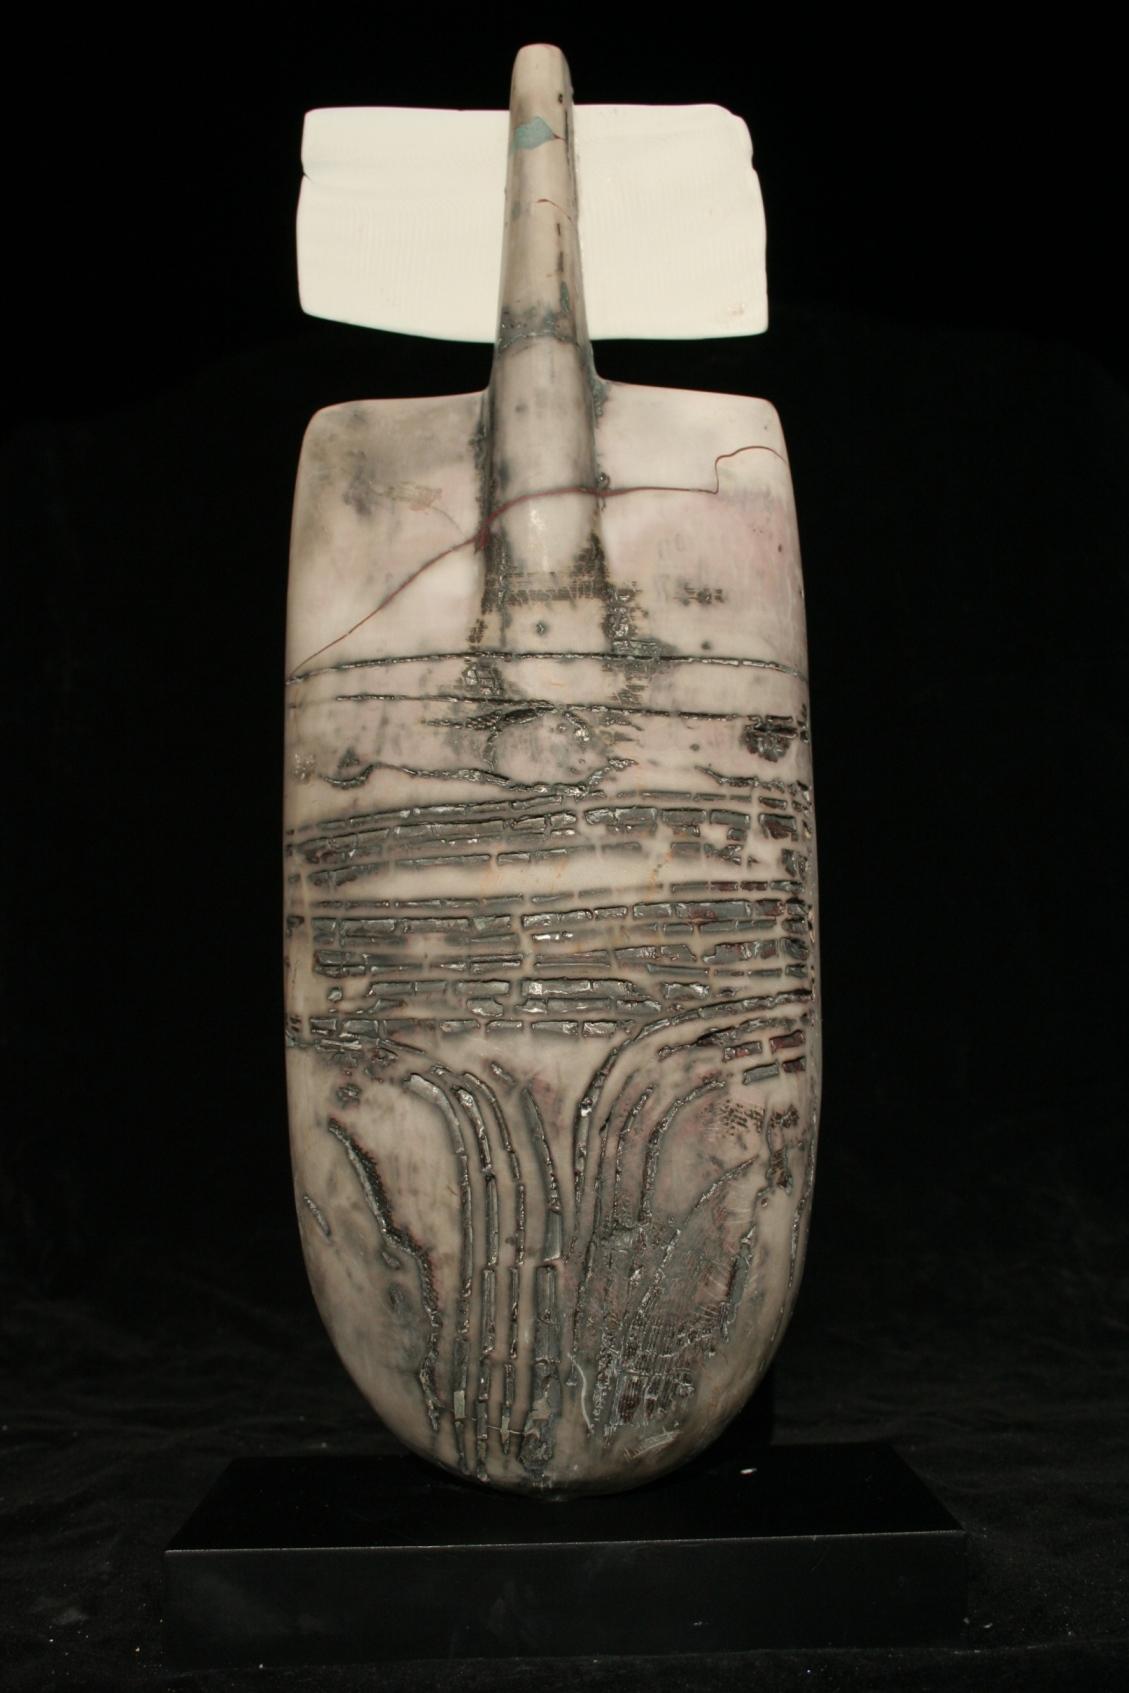 This obelisk shaped object is completely handmade, raku fired ceramic. The surface is textured with ridges and grooves which have a variegated patina due to a natural aging process the artist uses. The artist has adorned top of the sculpture with